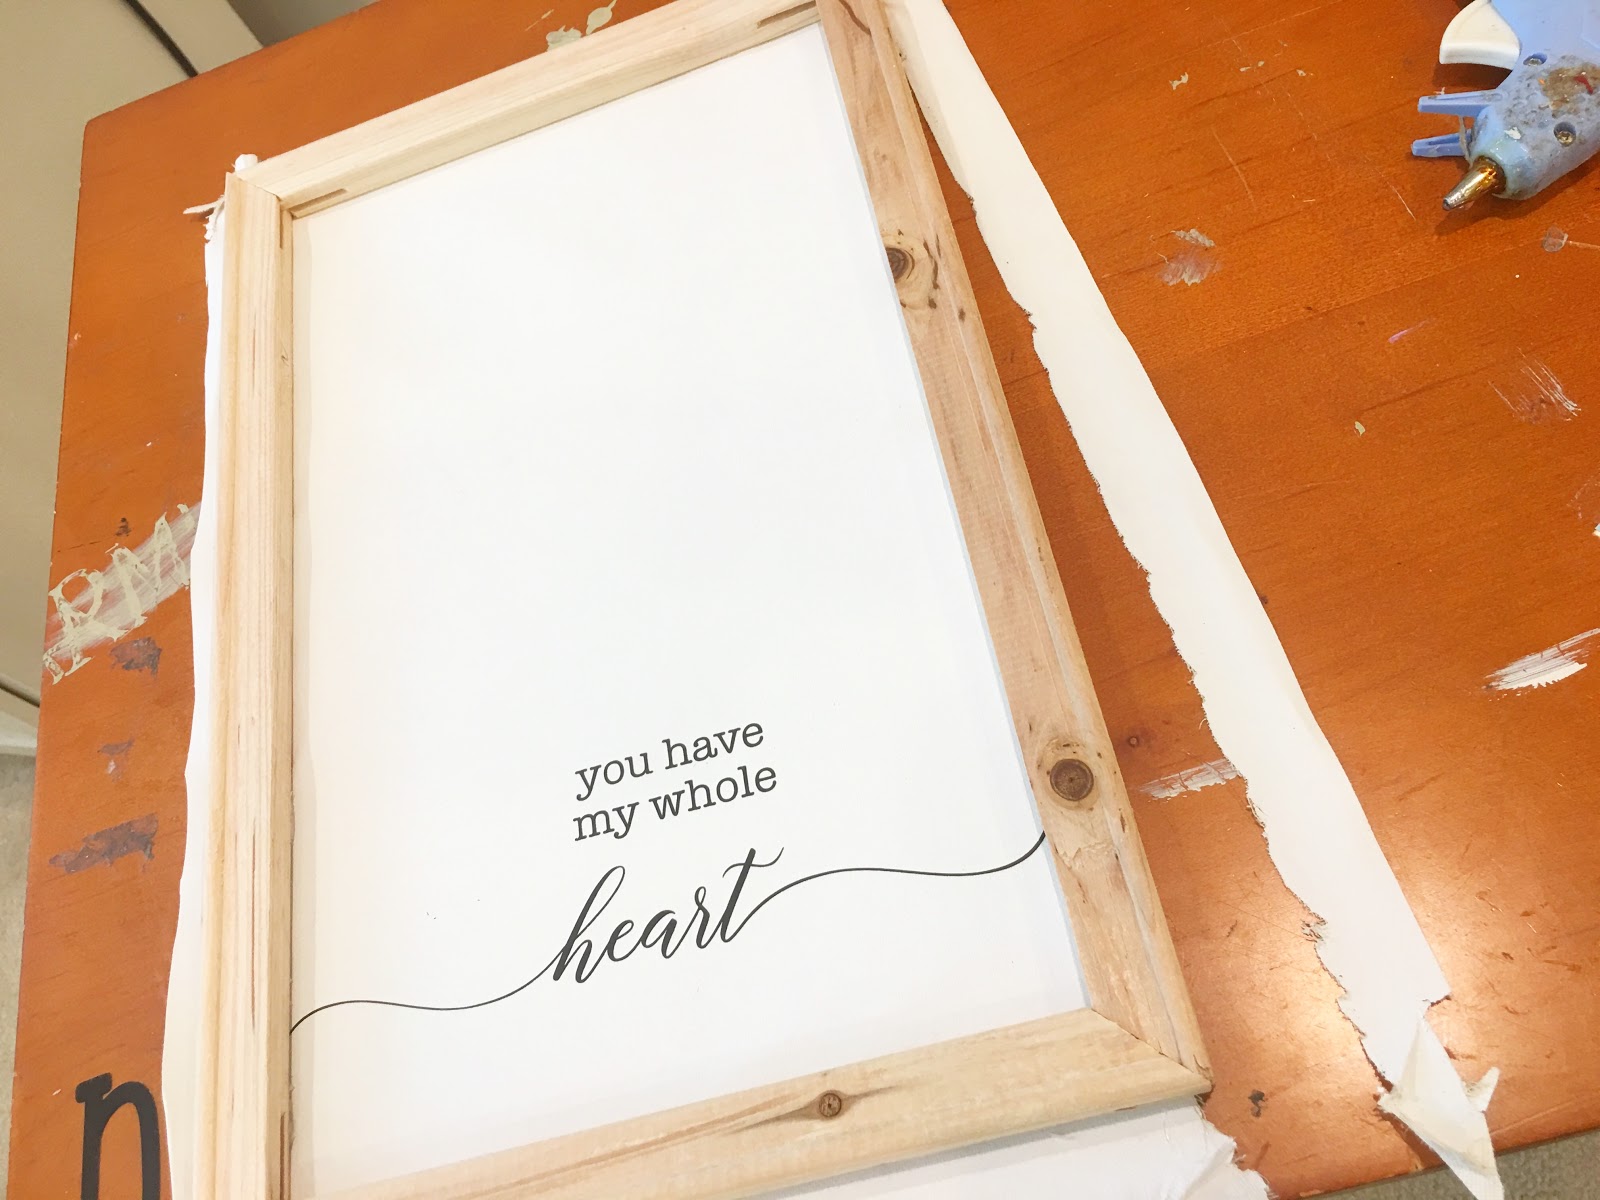 How to Make A Reverse Canvas Sign with a Faux Stained Frame